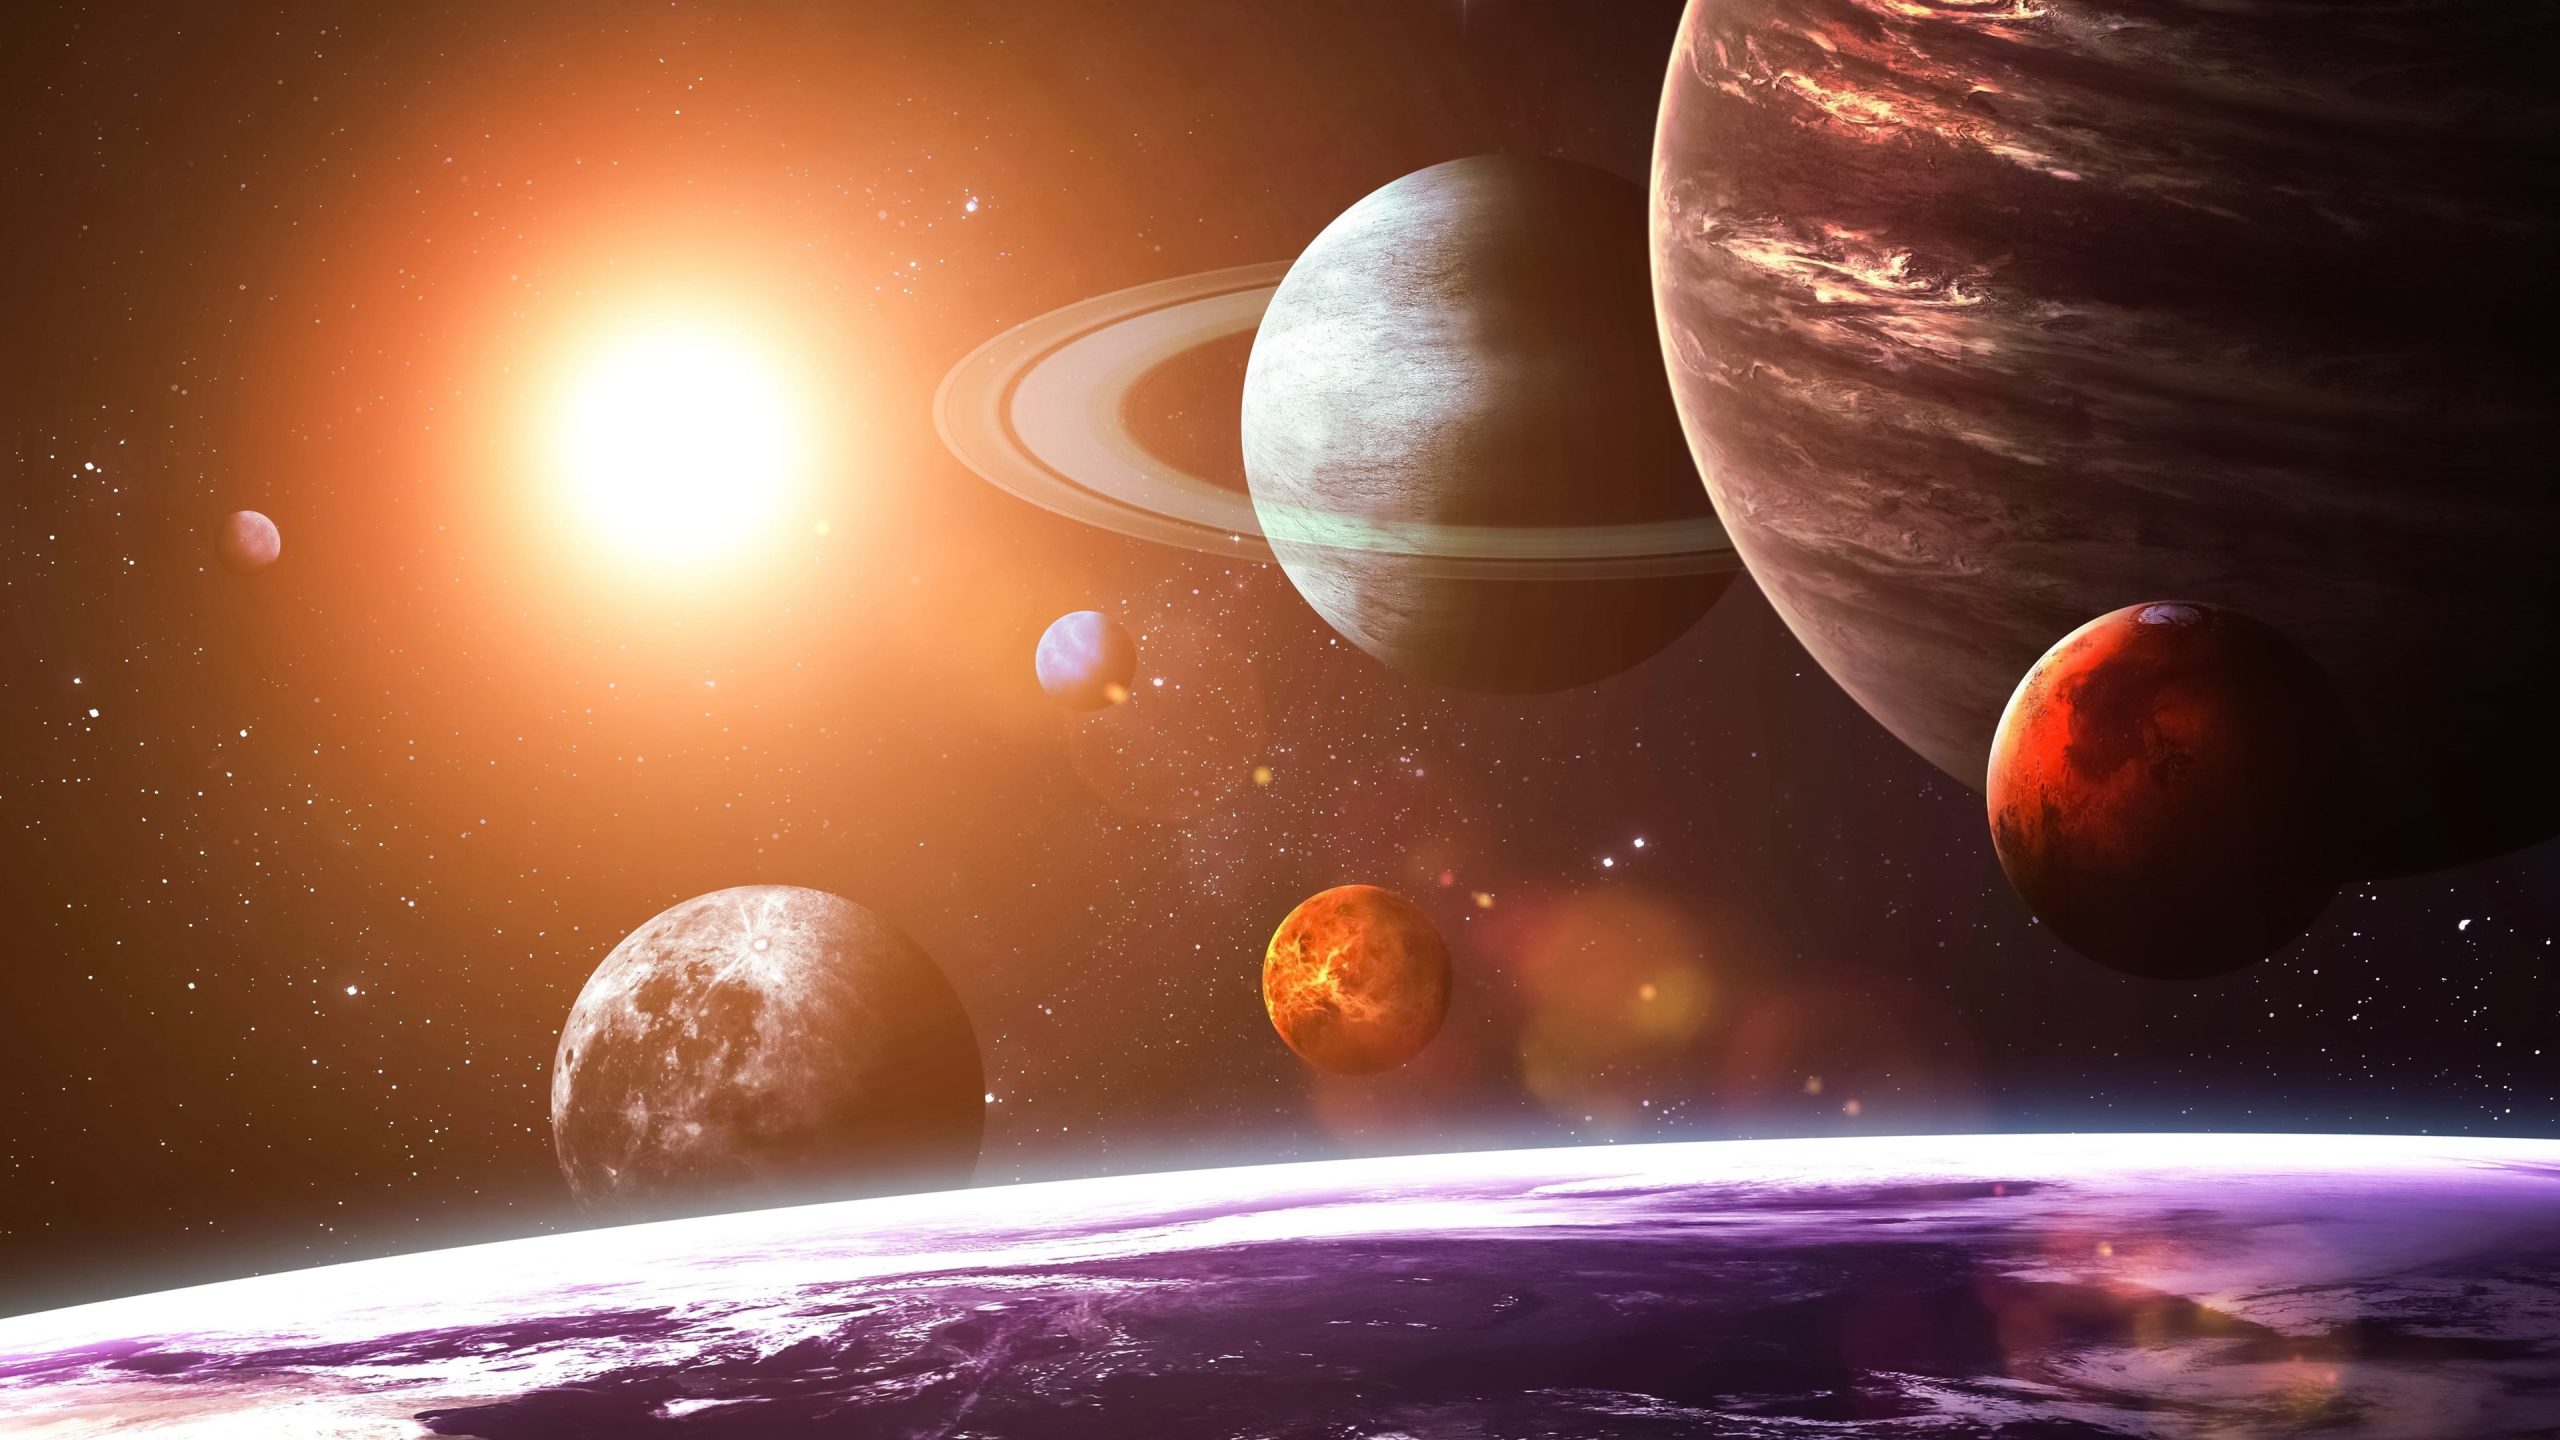 Formation of planets illustration wallpaper, space, Solar System, space art